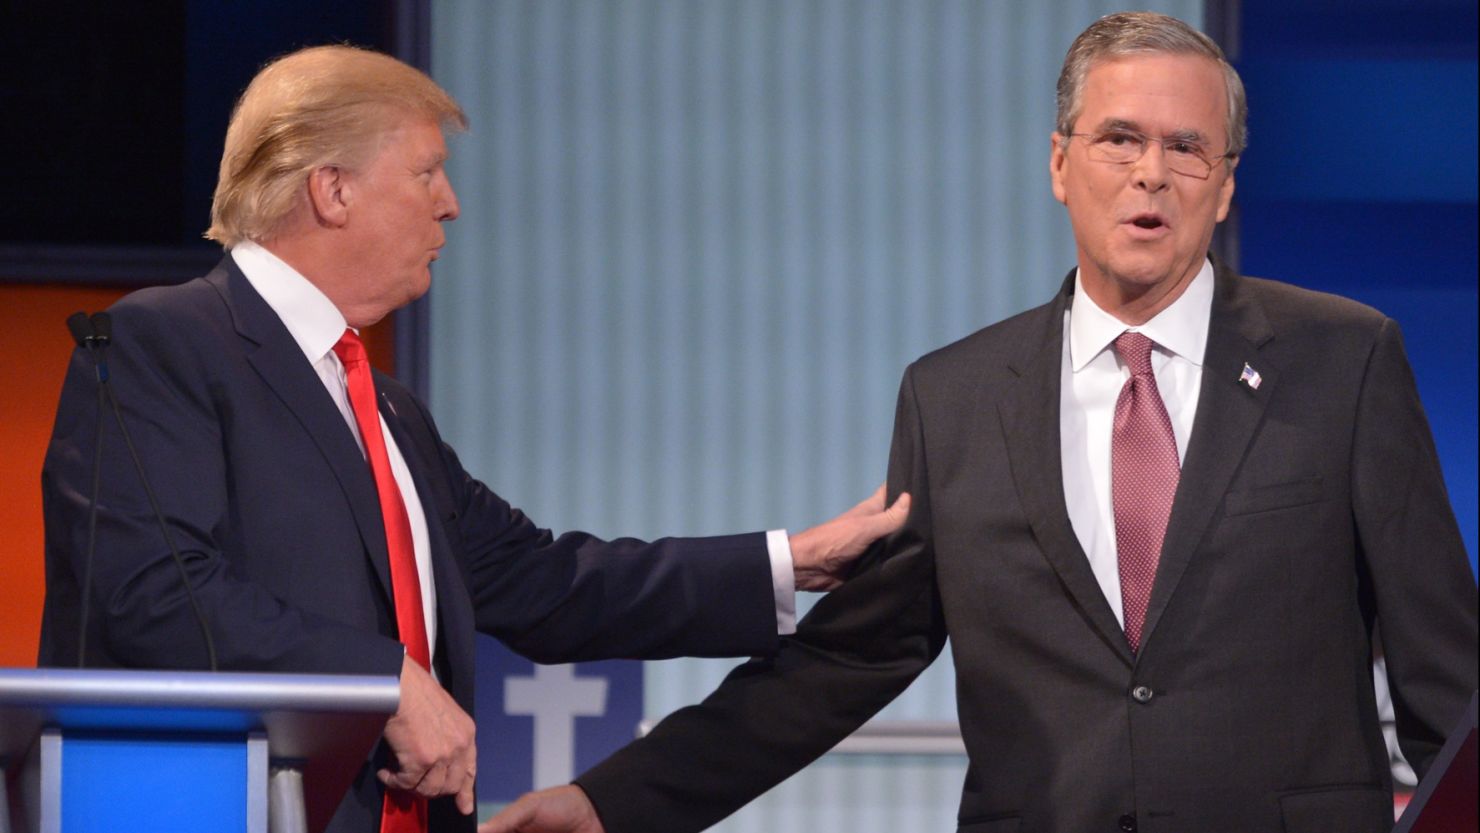 Jeb Bush opposed Donald Trump's call to end birthright citizenship on Tuesday.